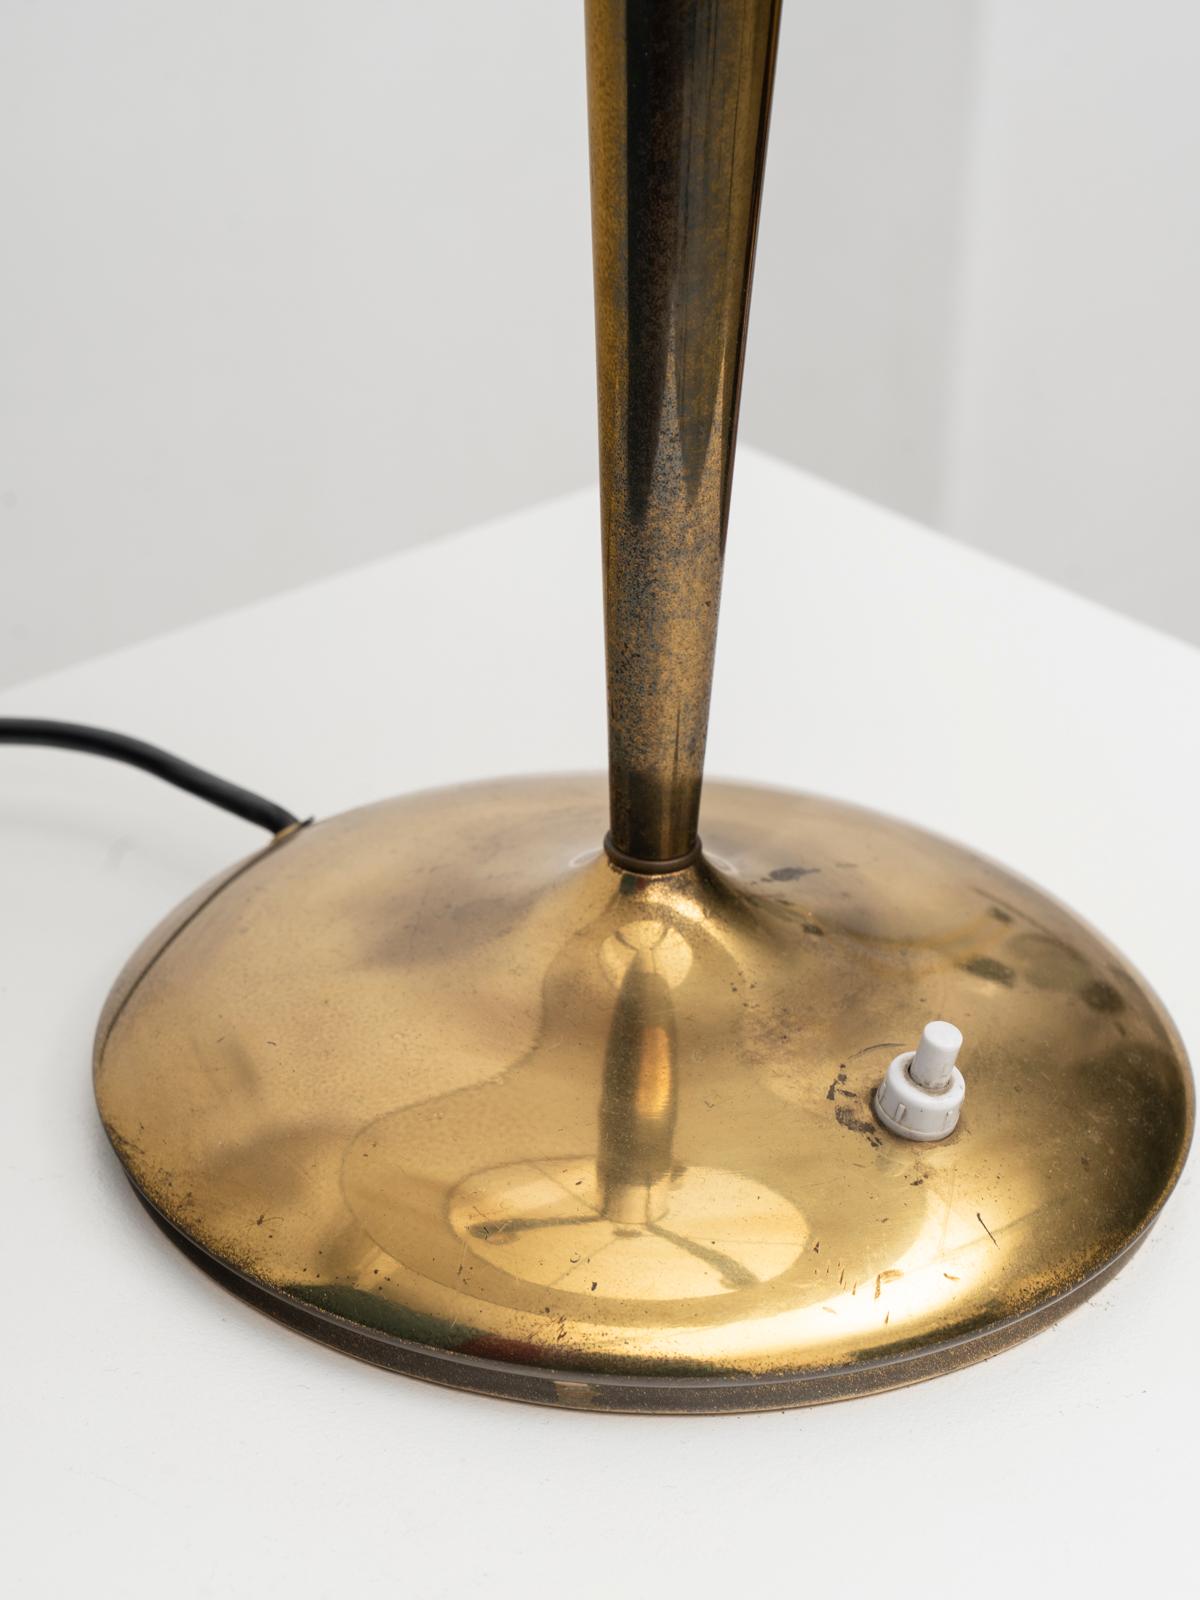 Polished Emilio Lancia Modern Brass Tall Table Lamp, 1940s For Sale